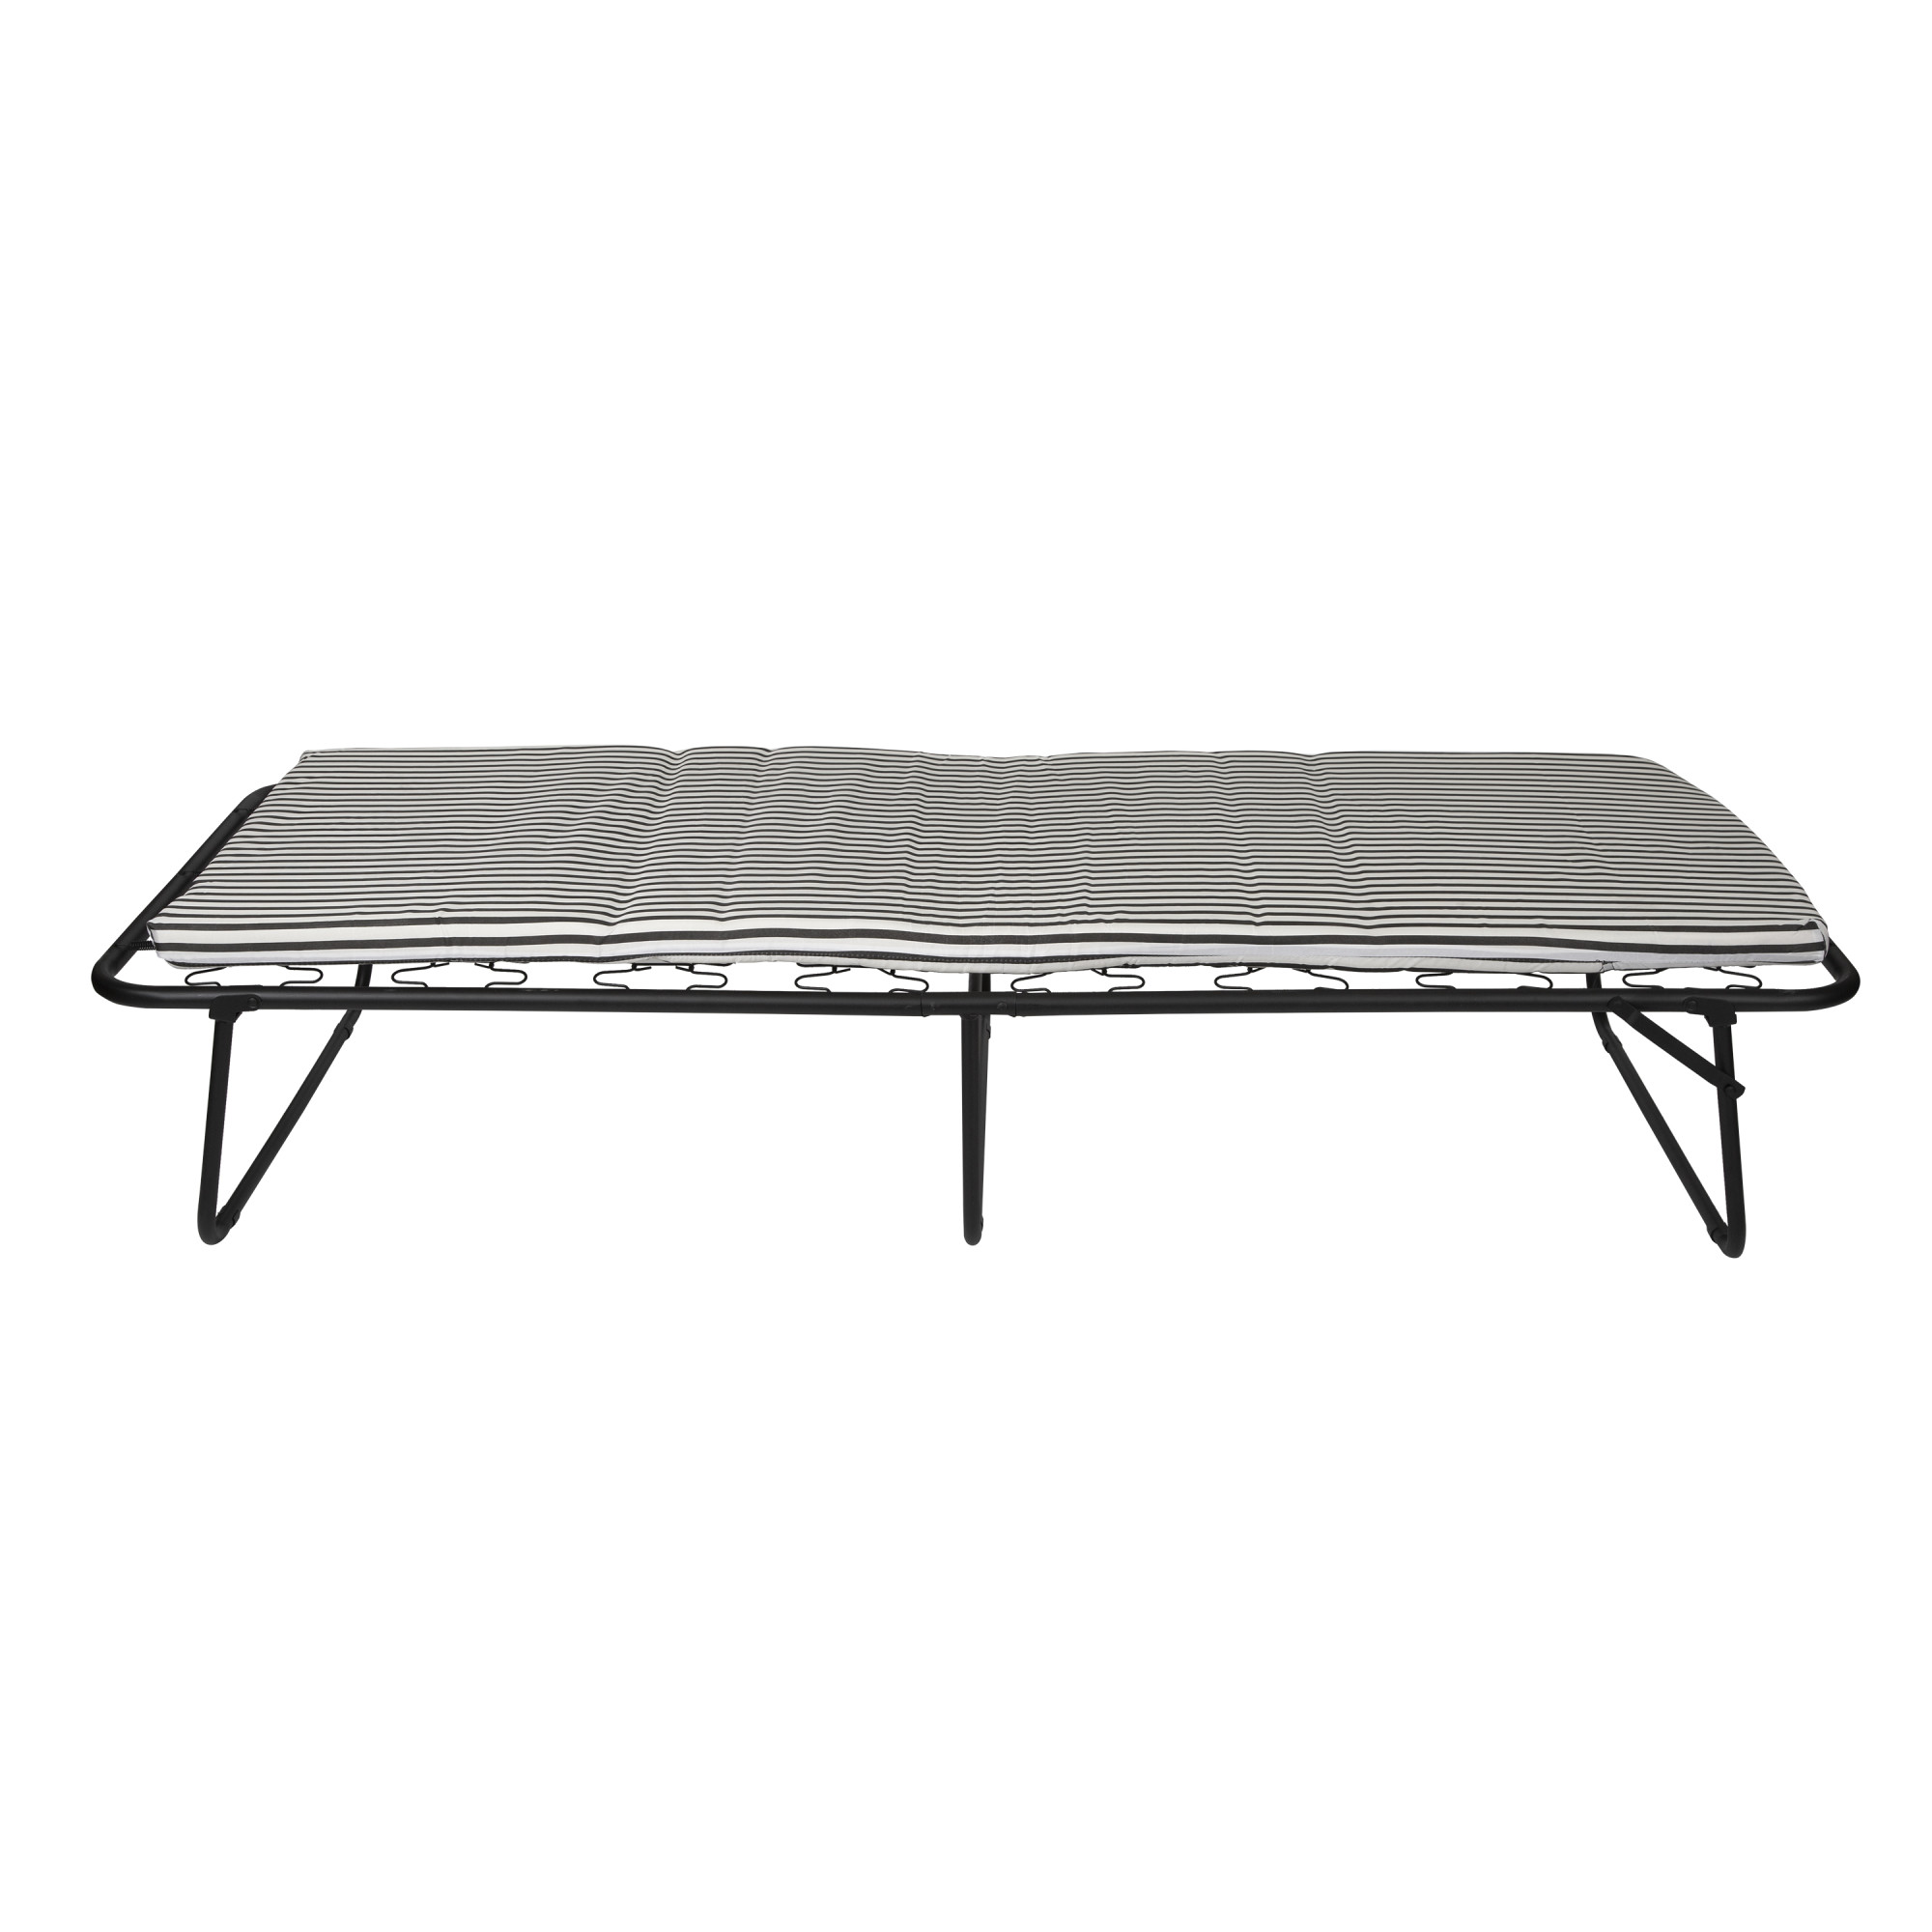 Stansport Steel Cot With Mattress - 75" x 31" x 13-1/2" - image 3 of 12